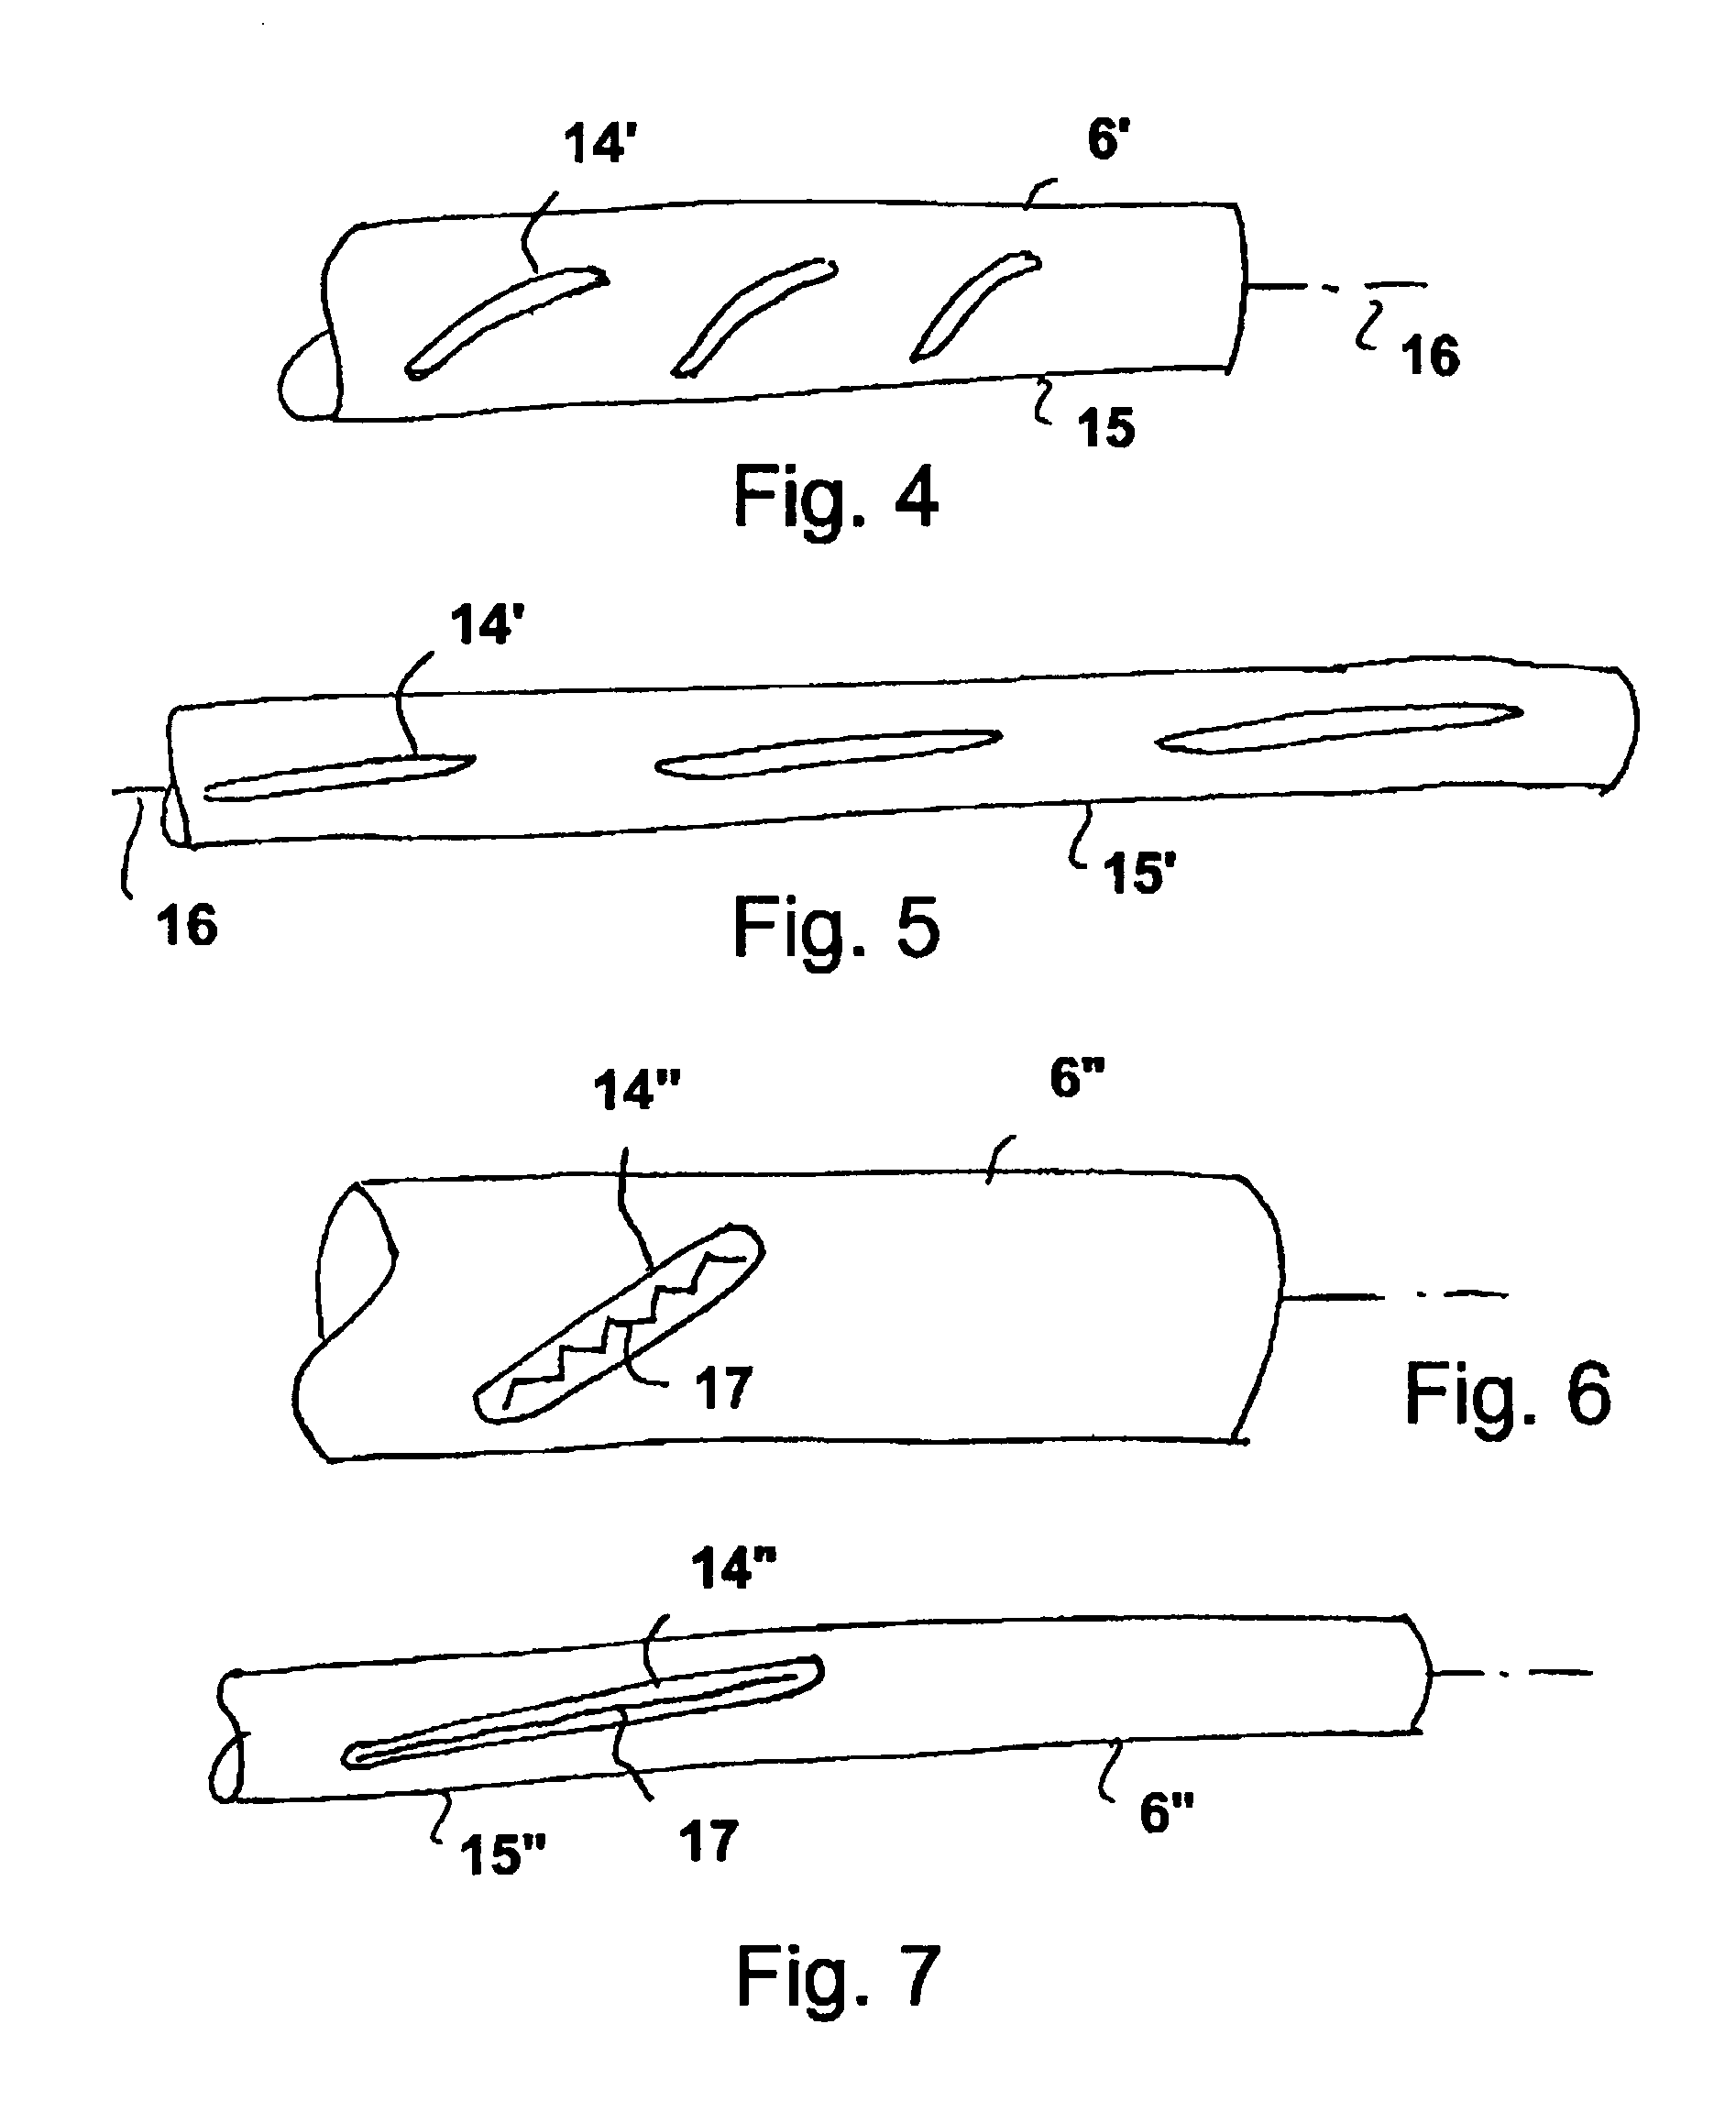 Fluid pump having a radially compressible rotor